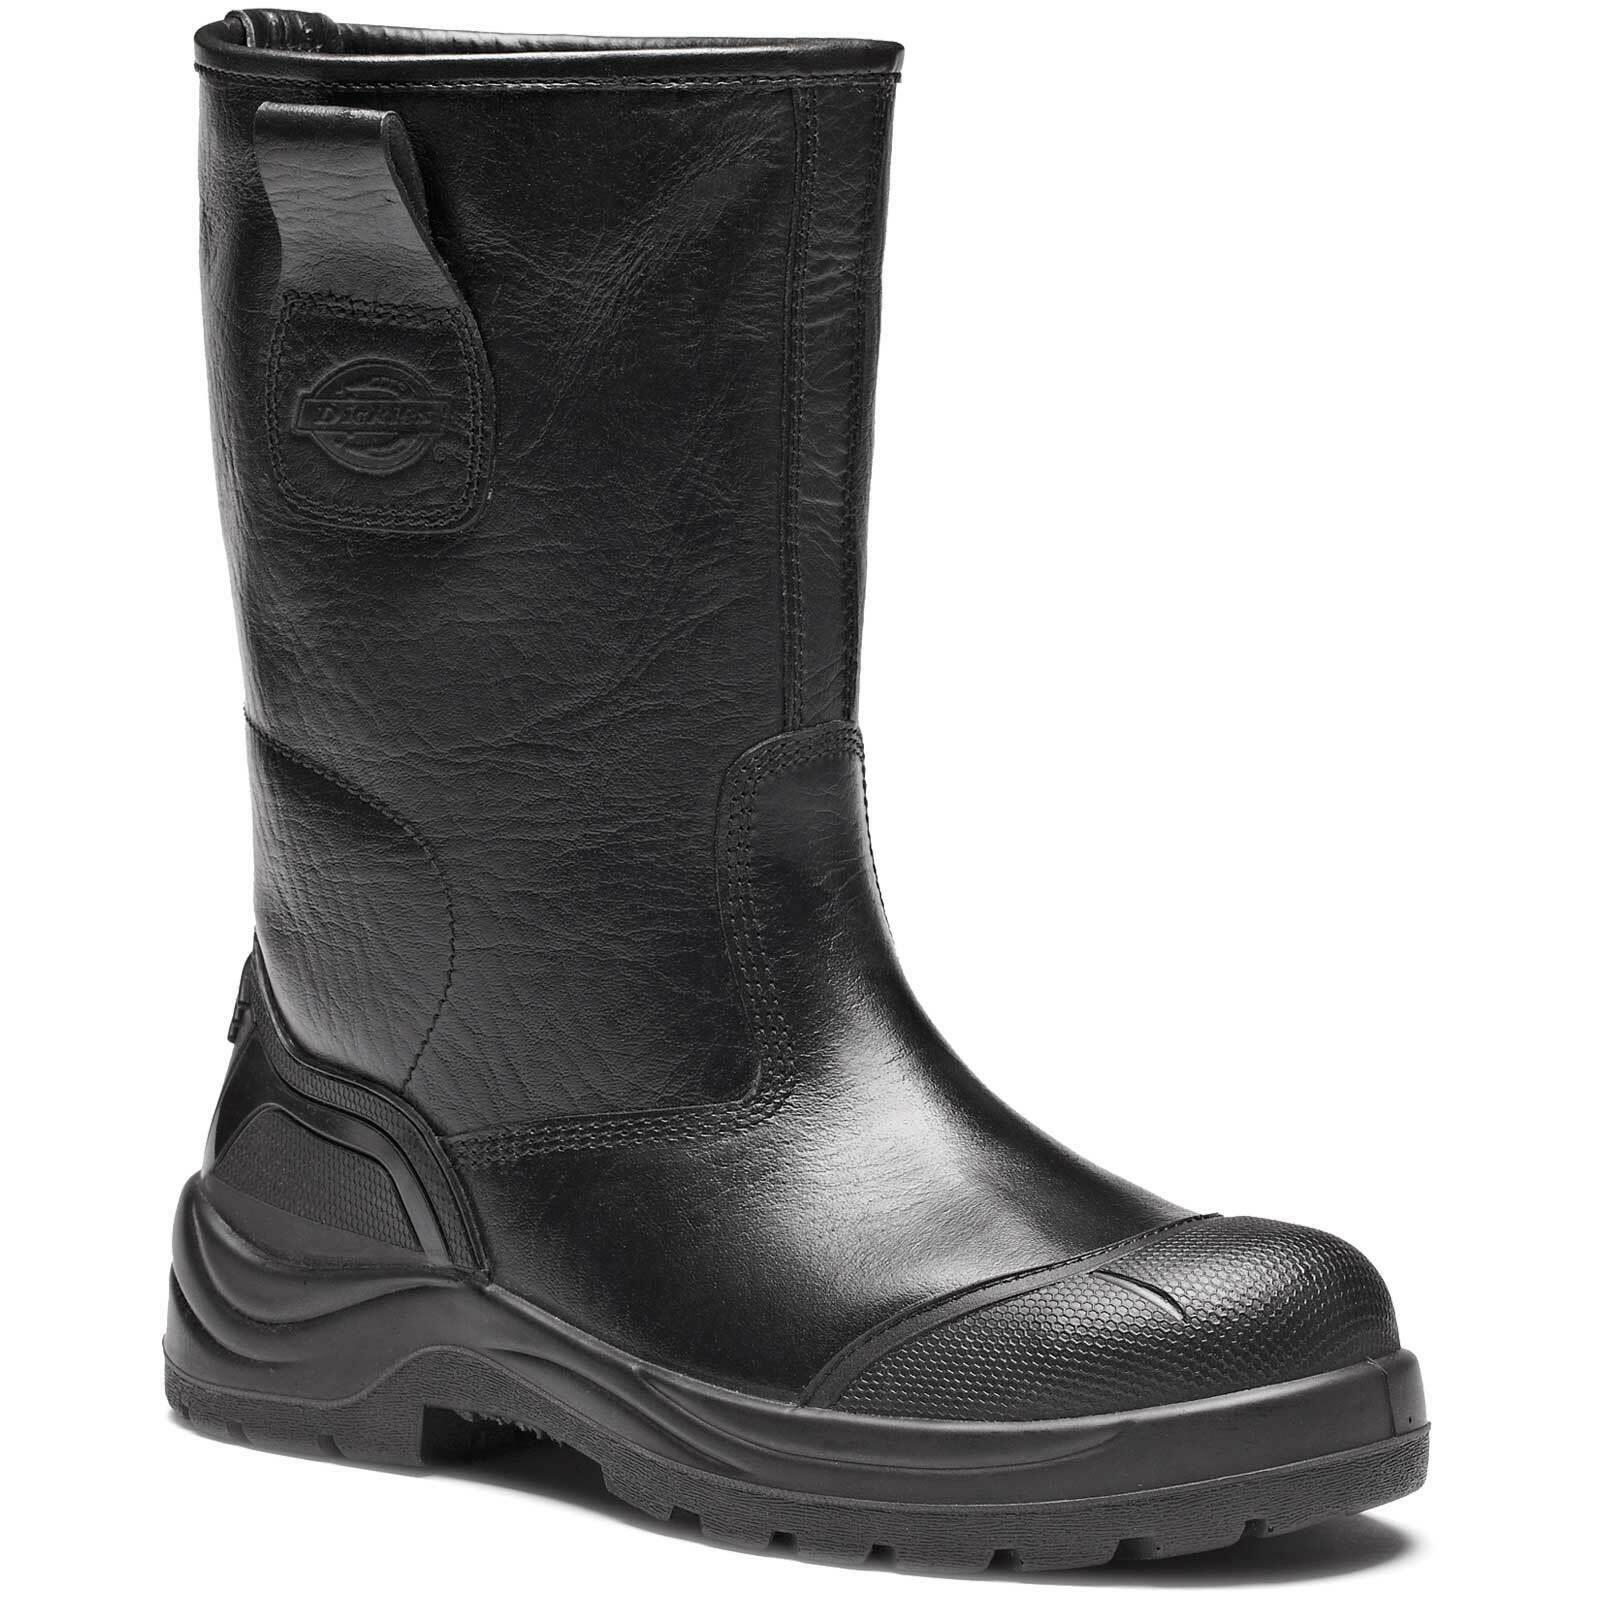 MENS DICKIES COWETA SAFETY RIGGER BOOTS SIZE UK 5 - 12 STEEL TOE BLACK ...